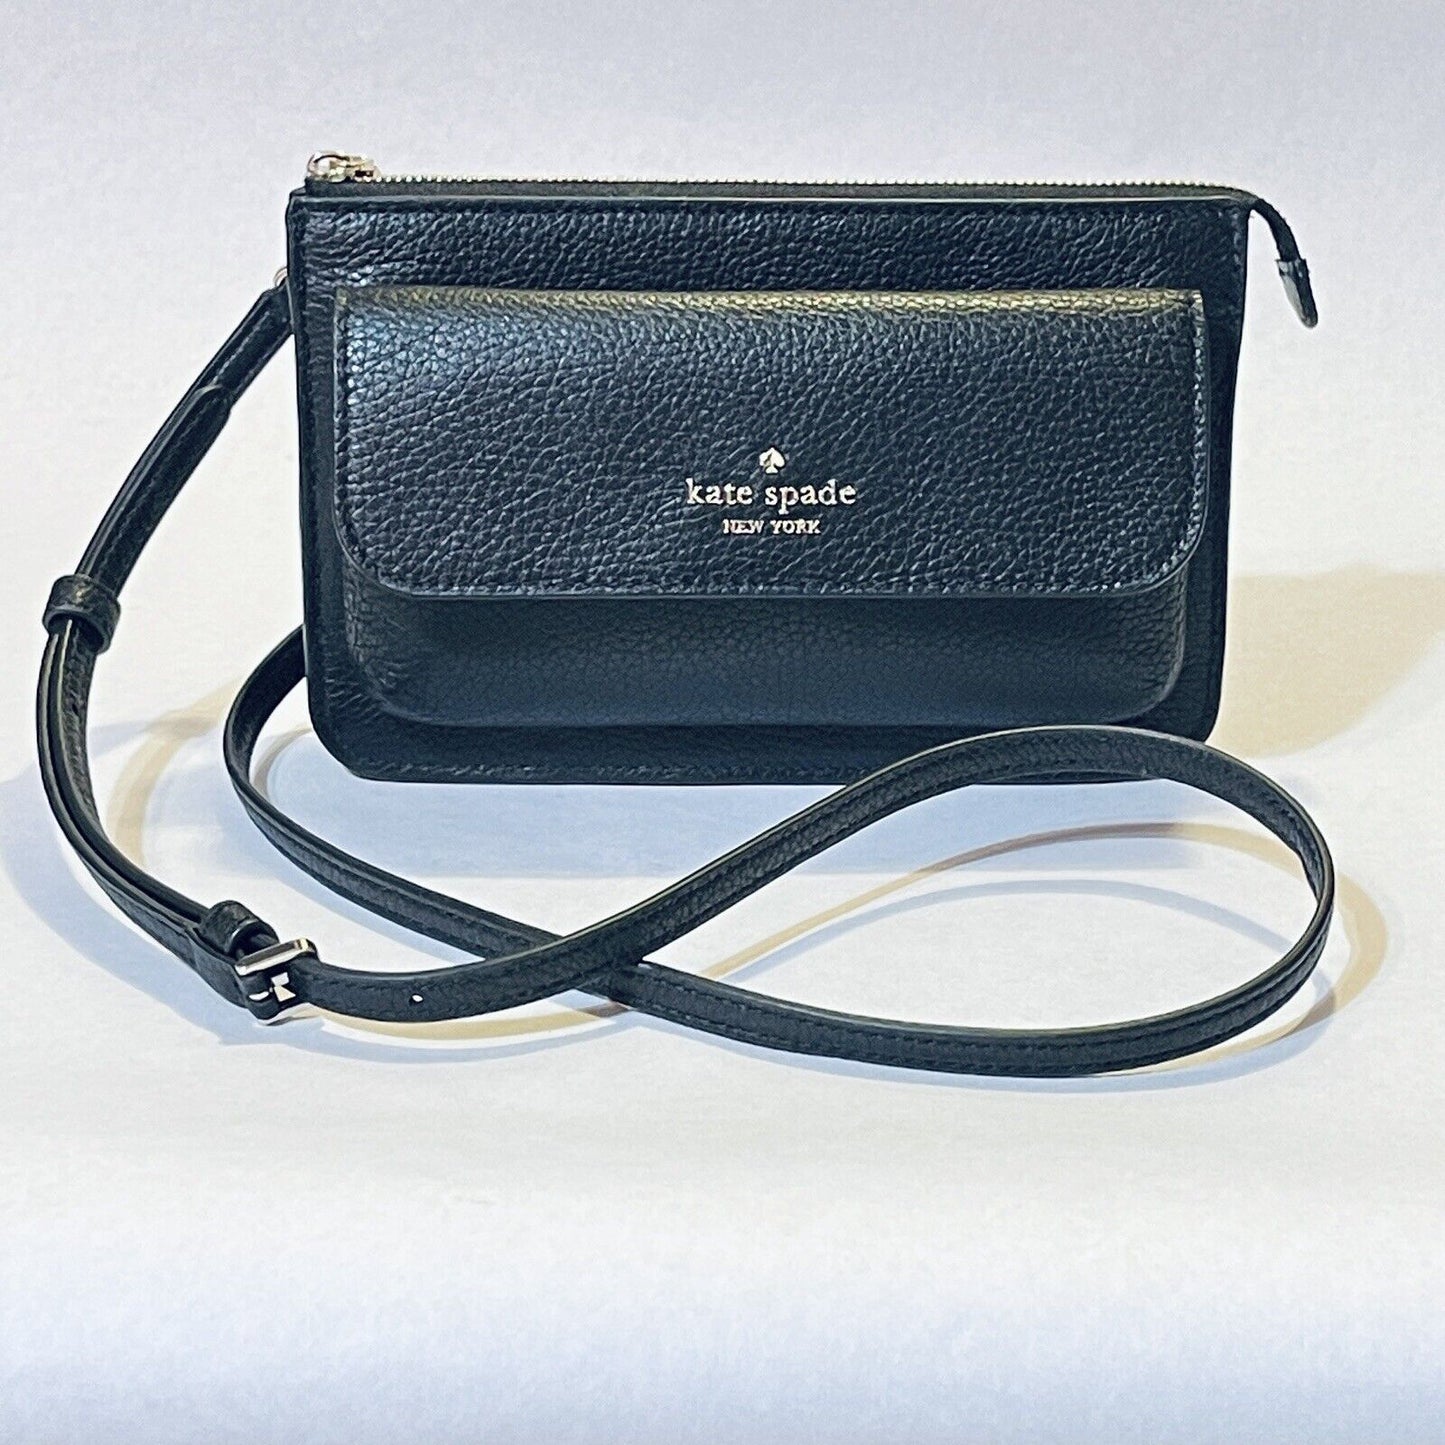 Kate Spade Leila Small Flap Crossbody Bag Pebbled Leather Pouch Purse Black Gold